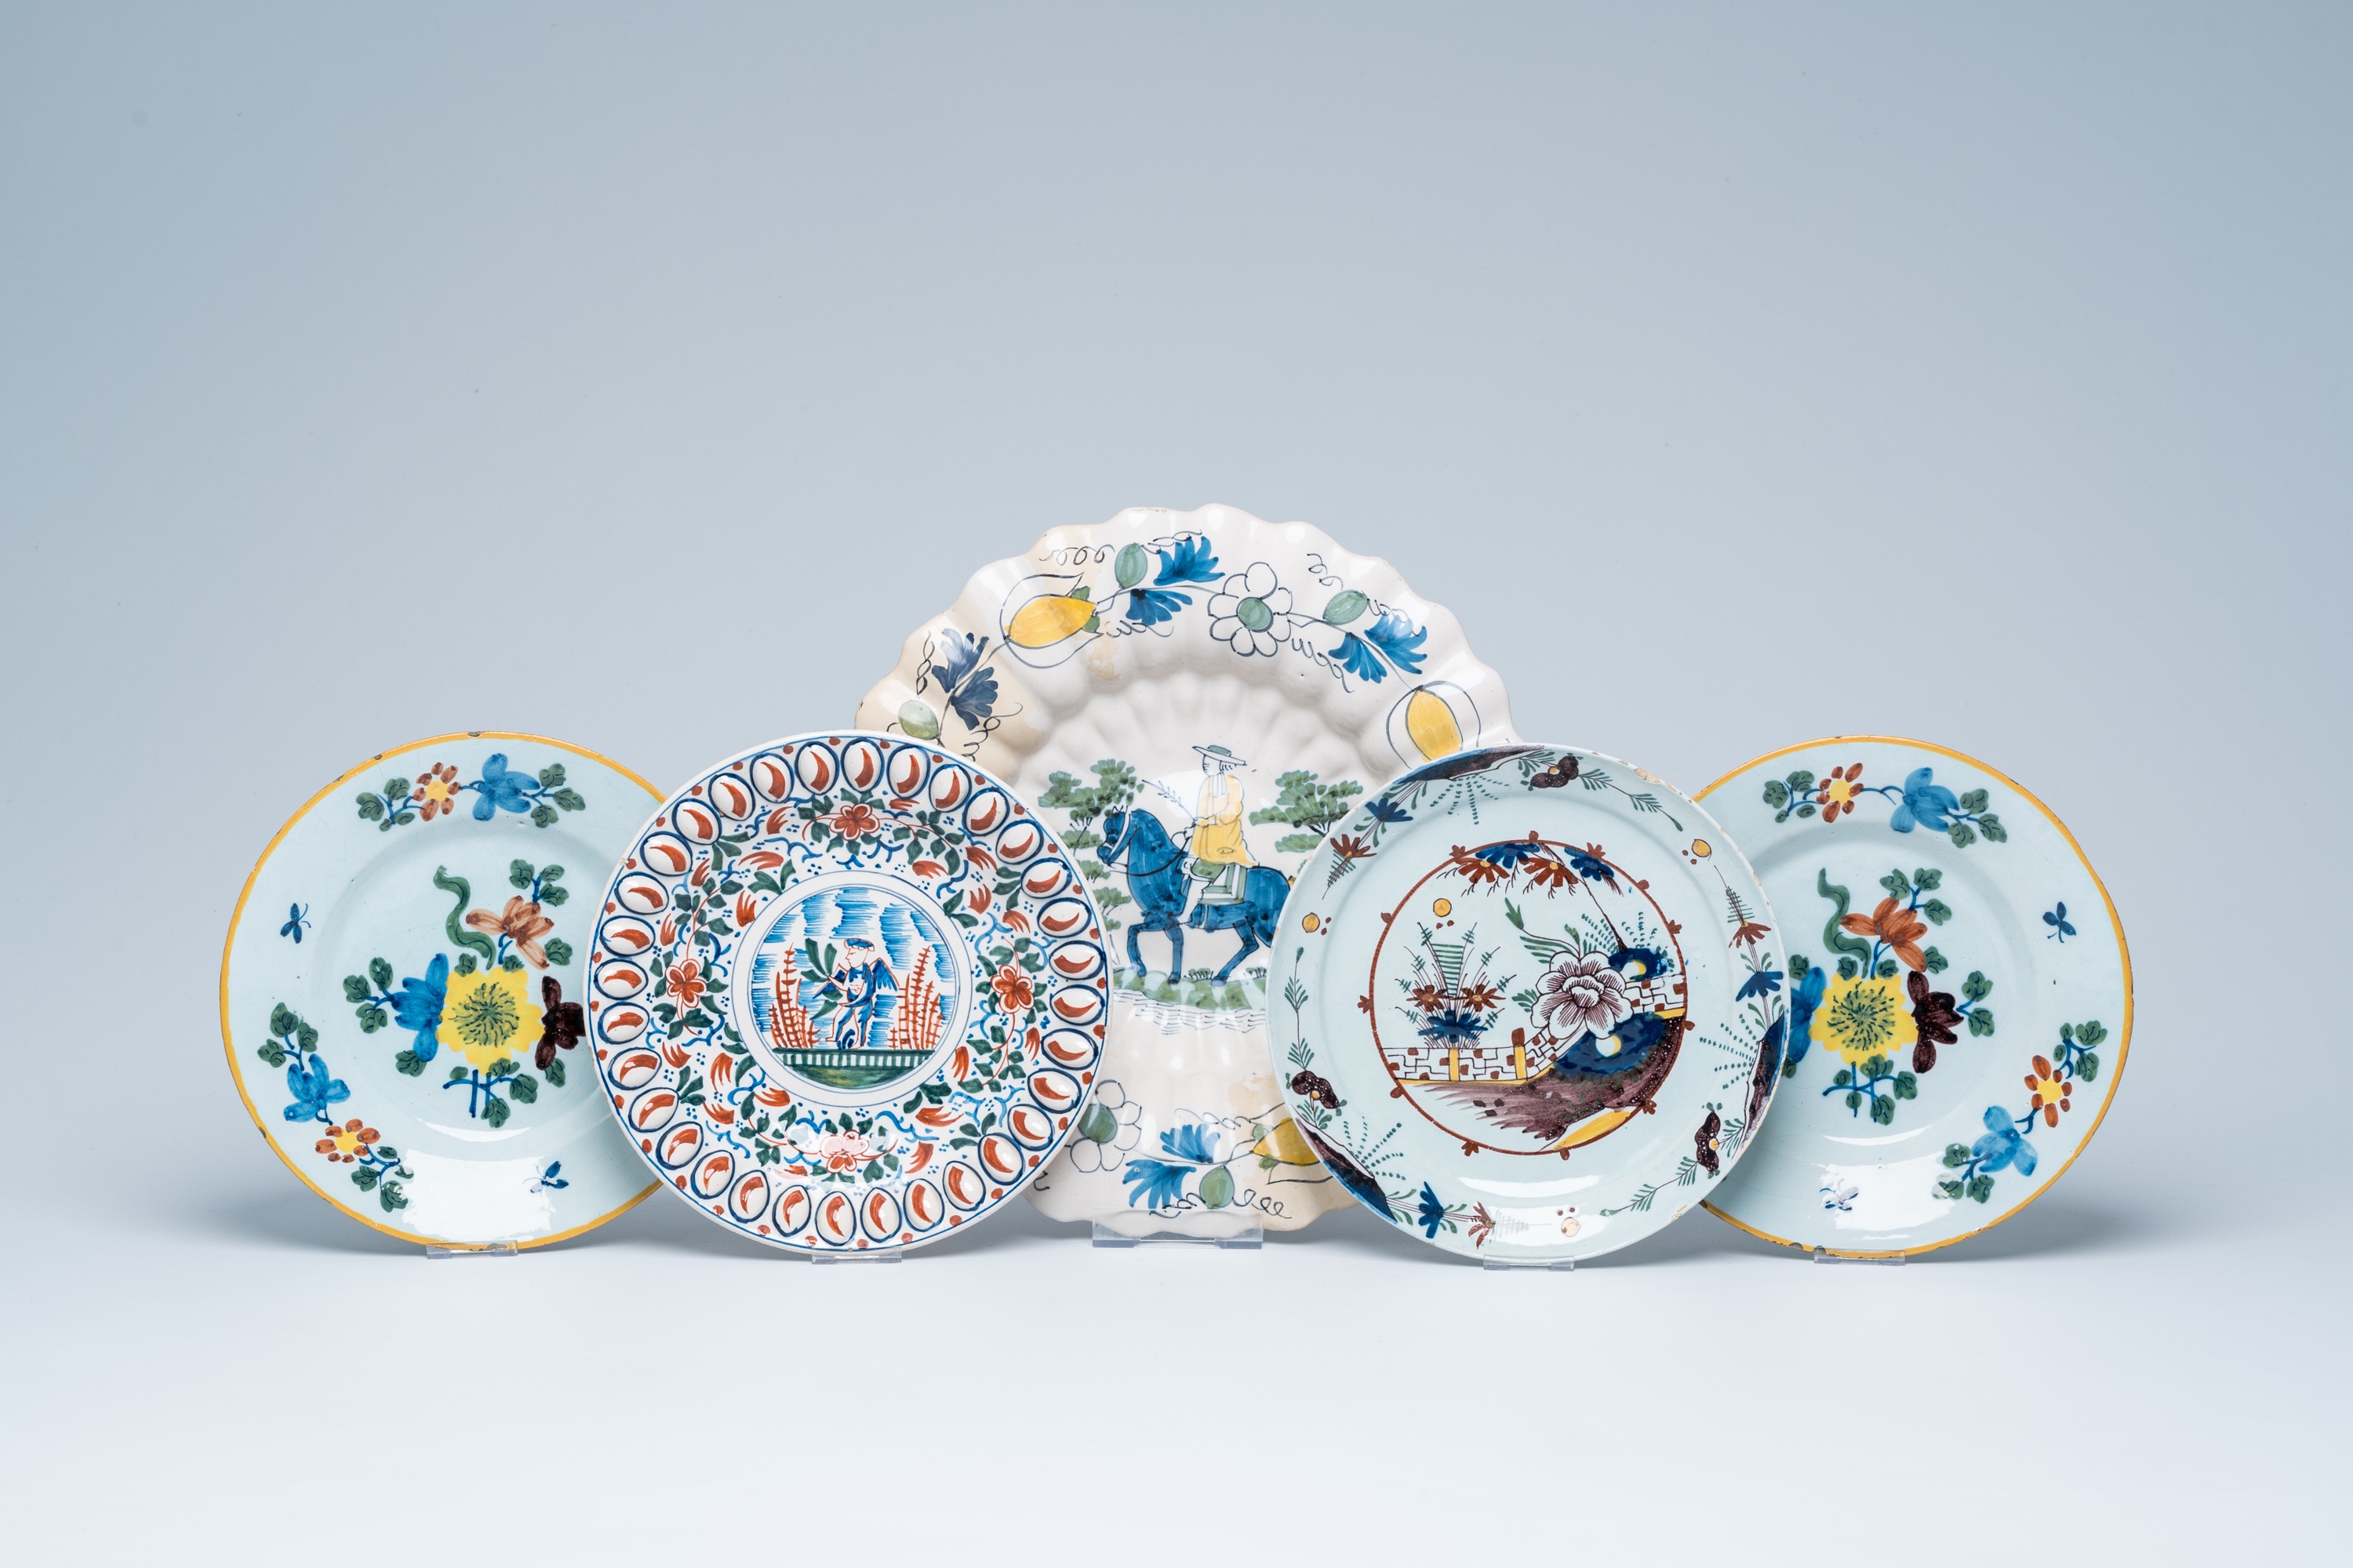 Five polychrome Delft dishes, England and The Netherlands, 18th C.